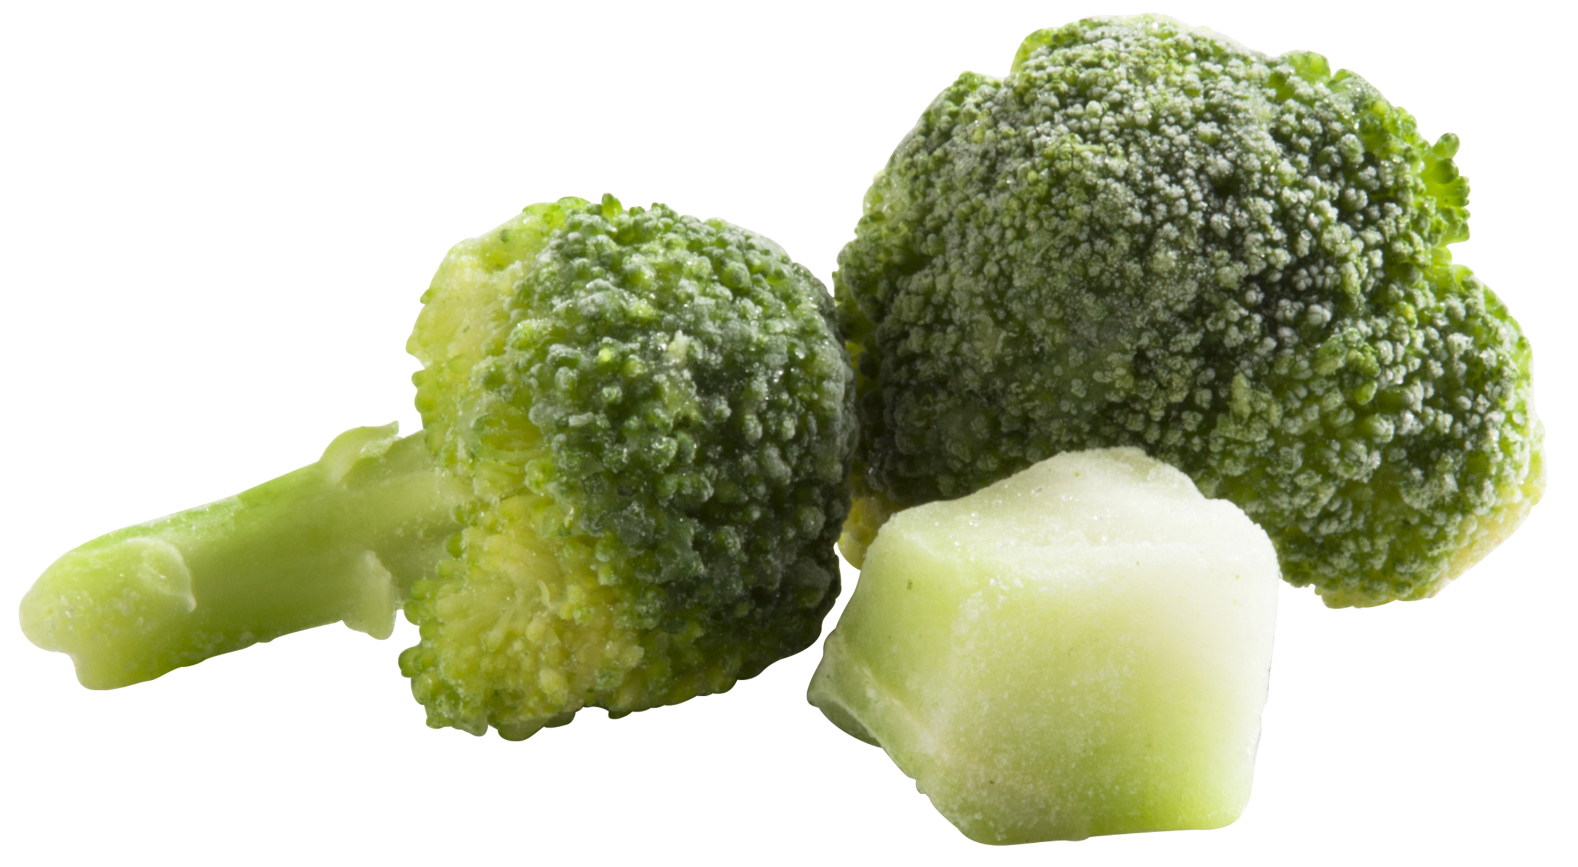 http://www.lavifood.com/en/products/blanching/broccoli